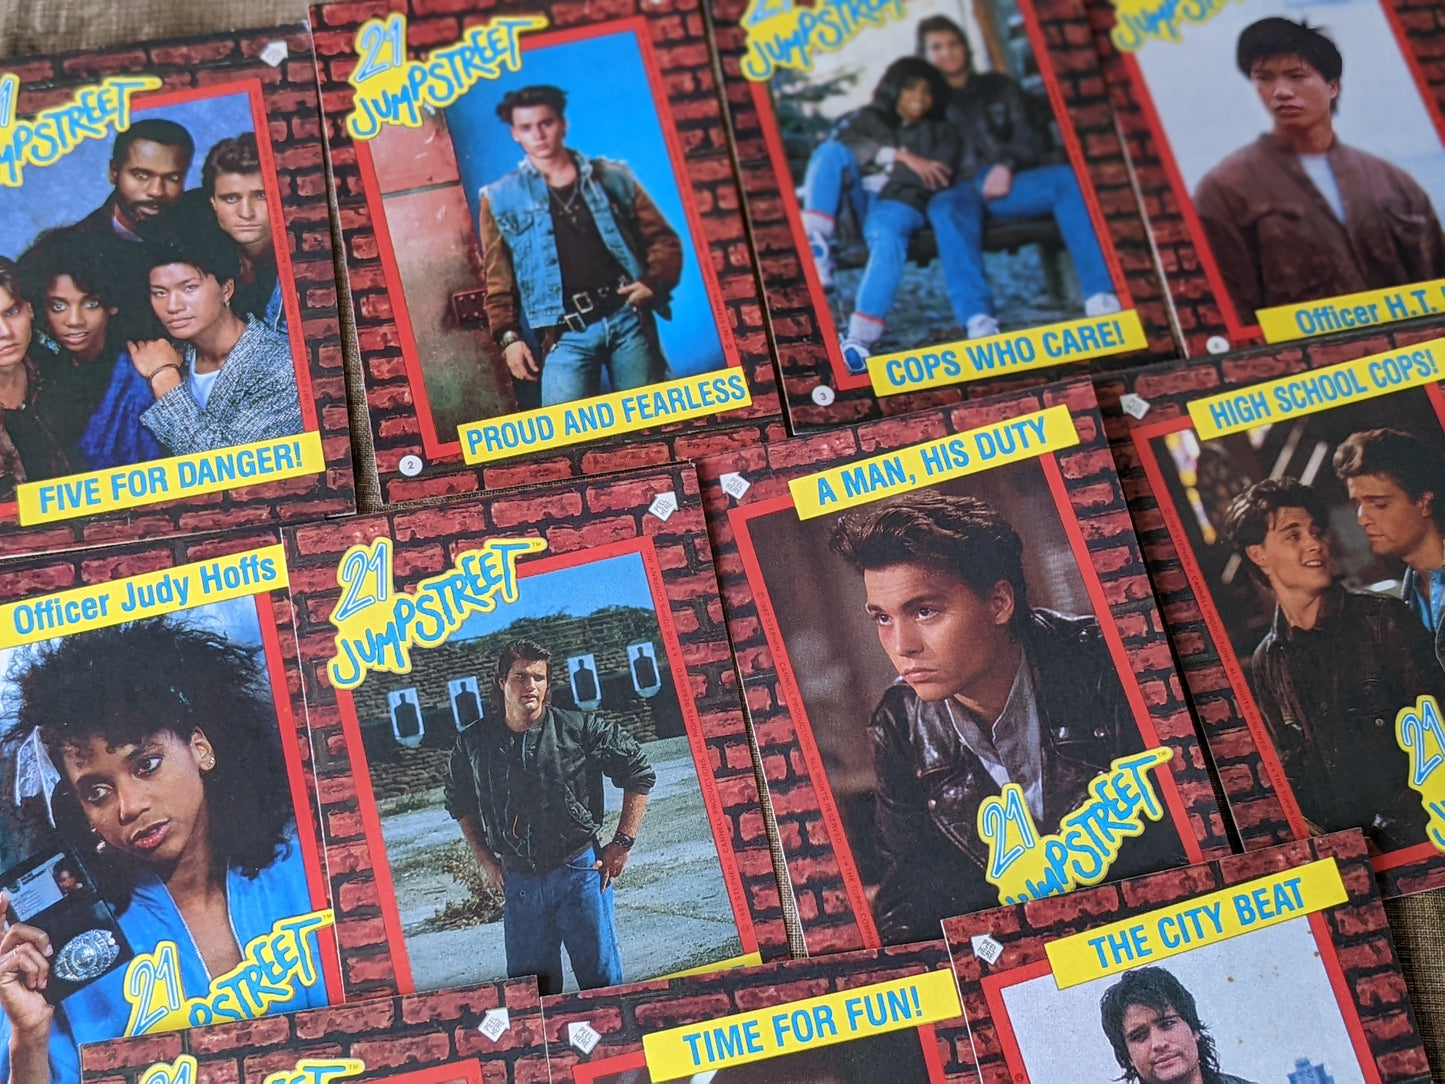 1987 21 Jumpstreet **Complete 44 Sticker Card Set by Topps